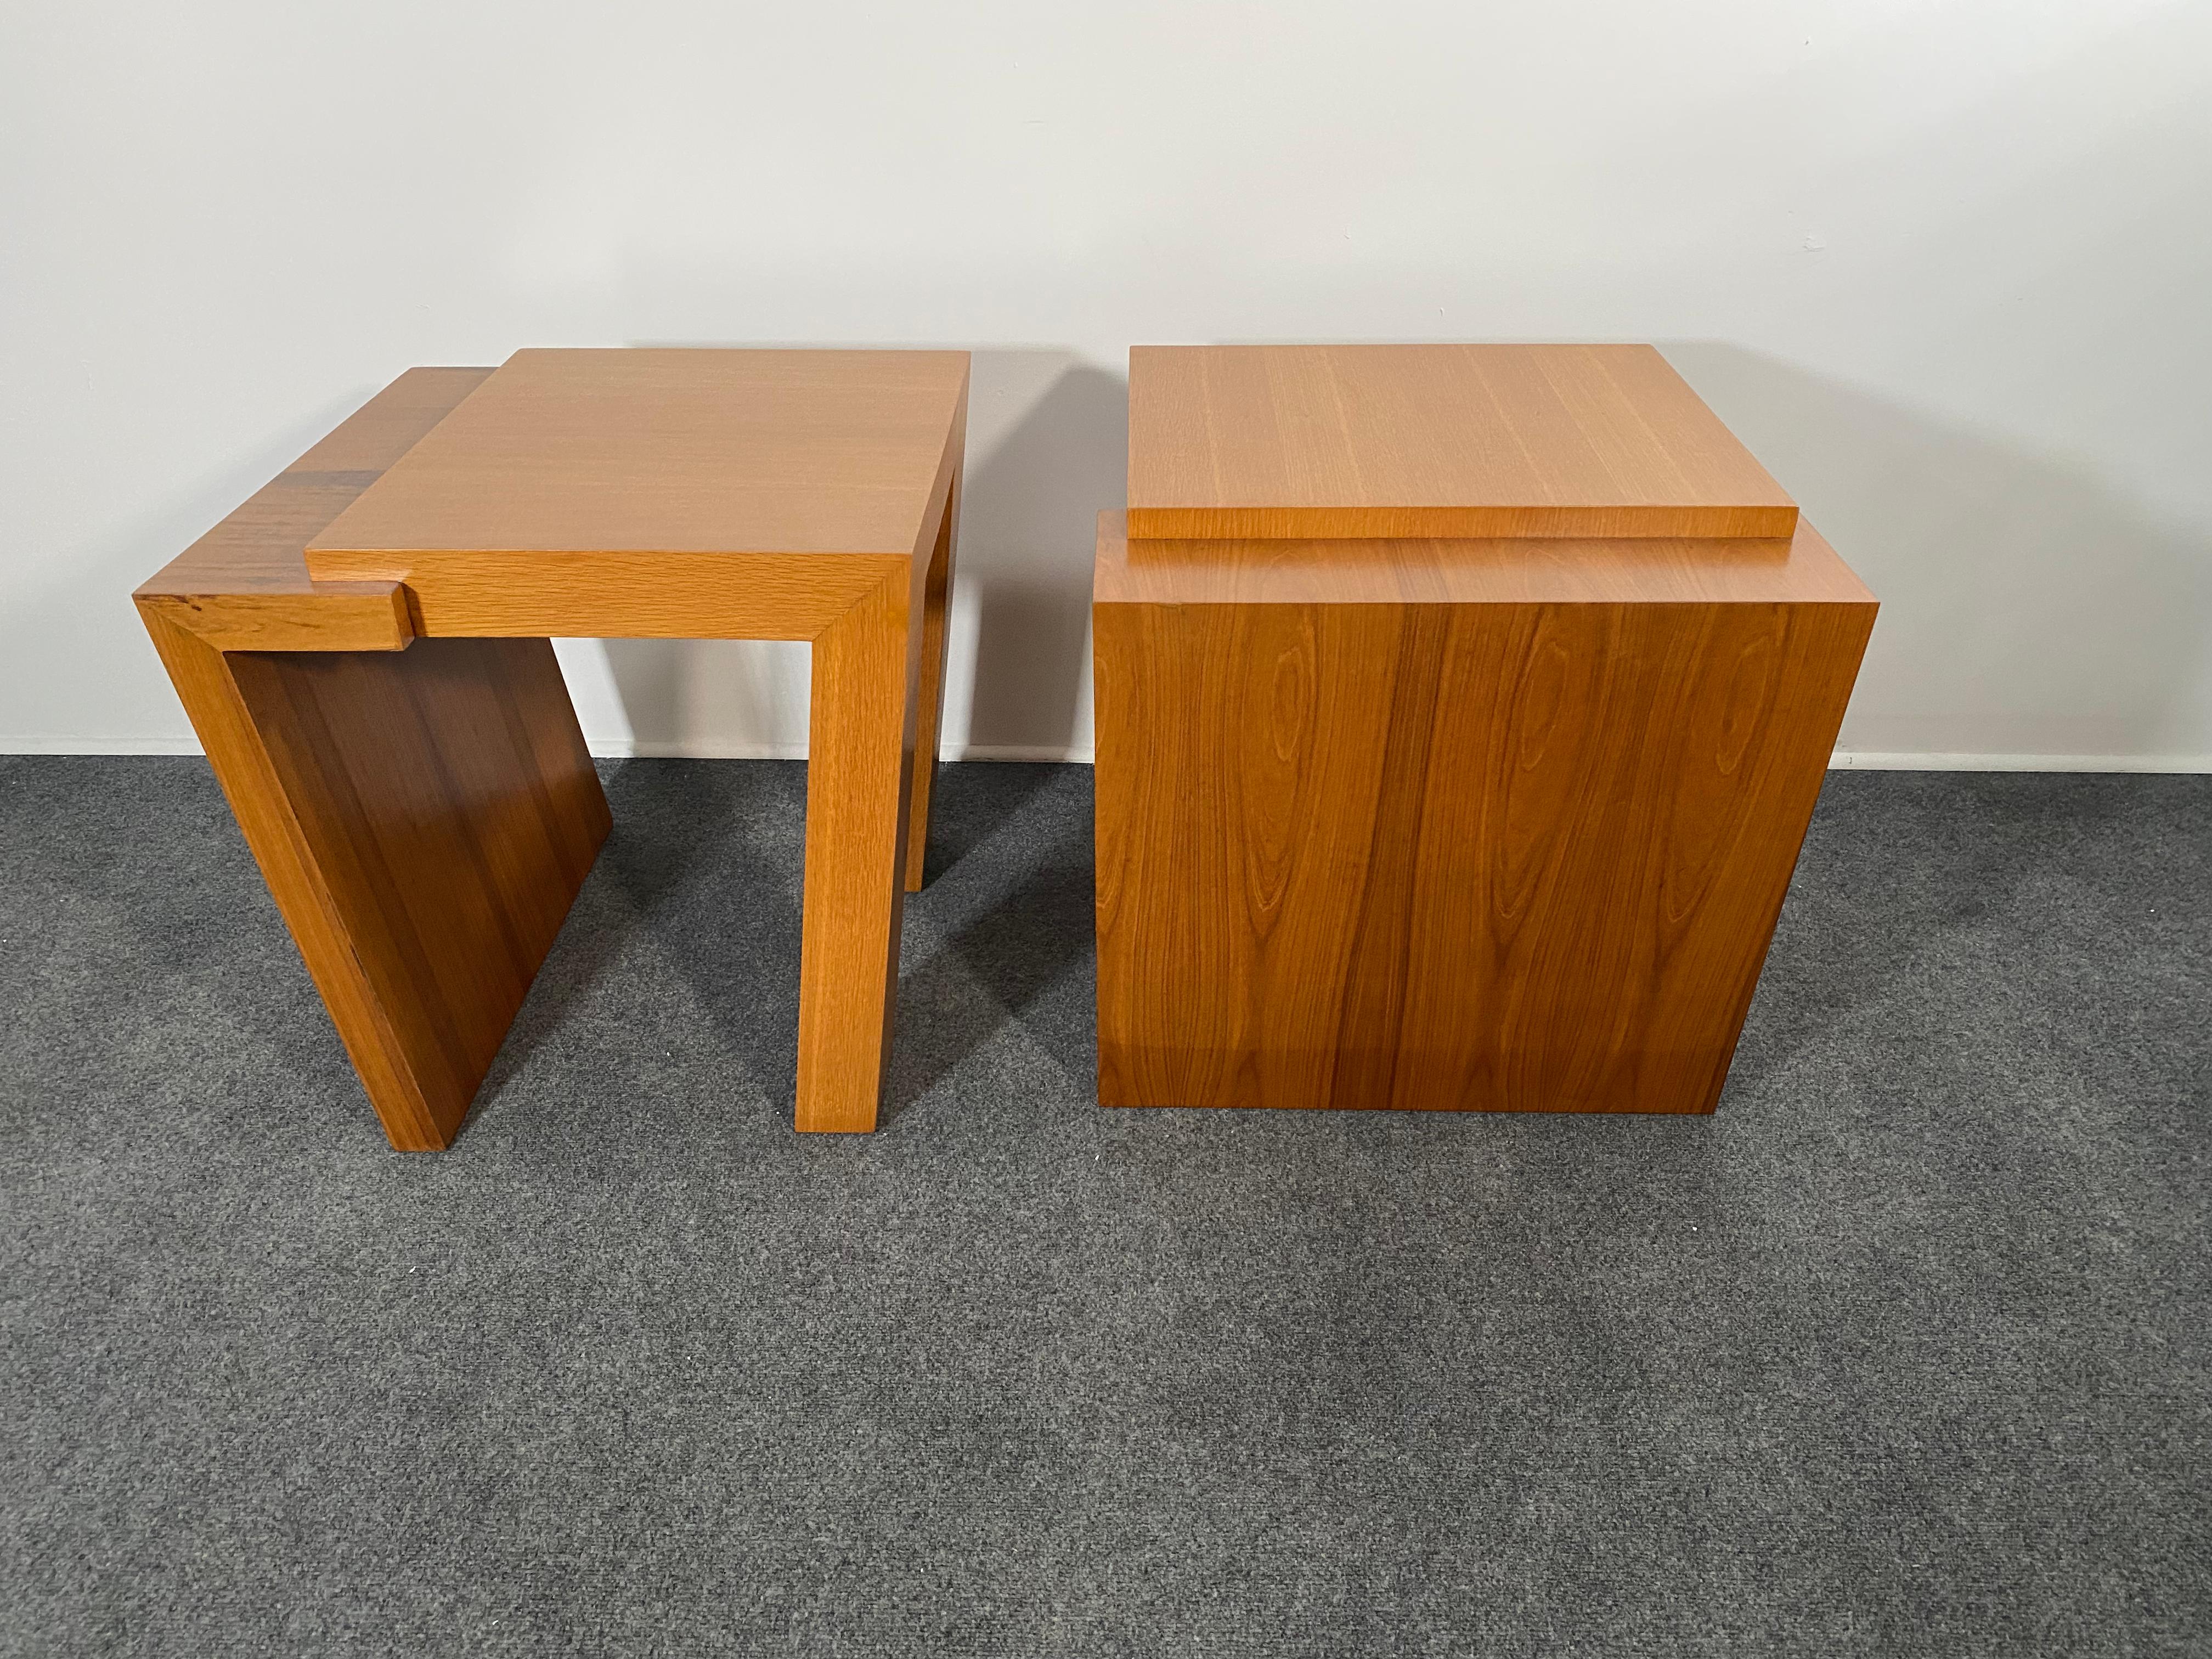 Unique Bespoke Pair Walnut and Bleached Mahogany End Tables, Antonio Fortuna For Sale 3